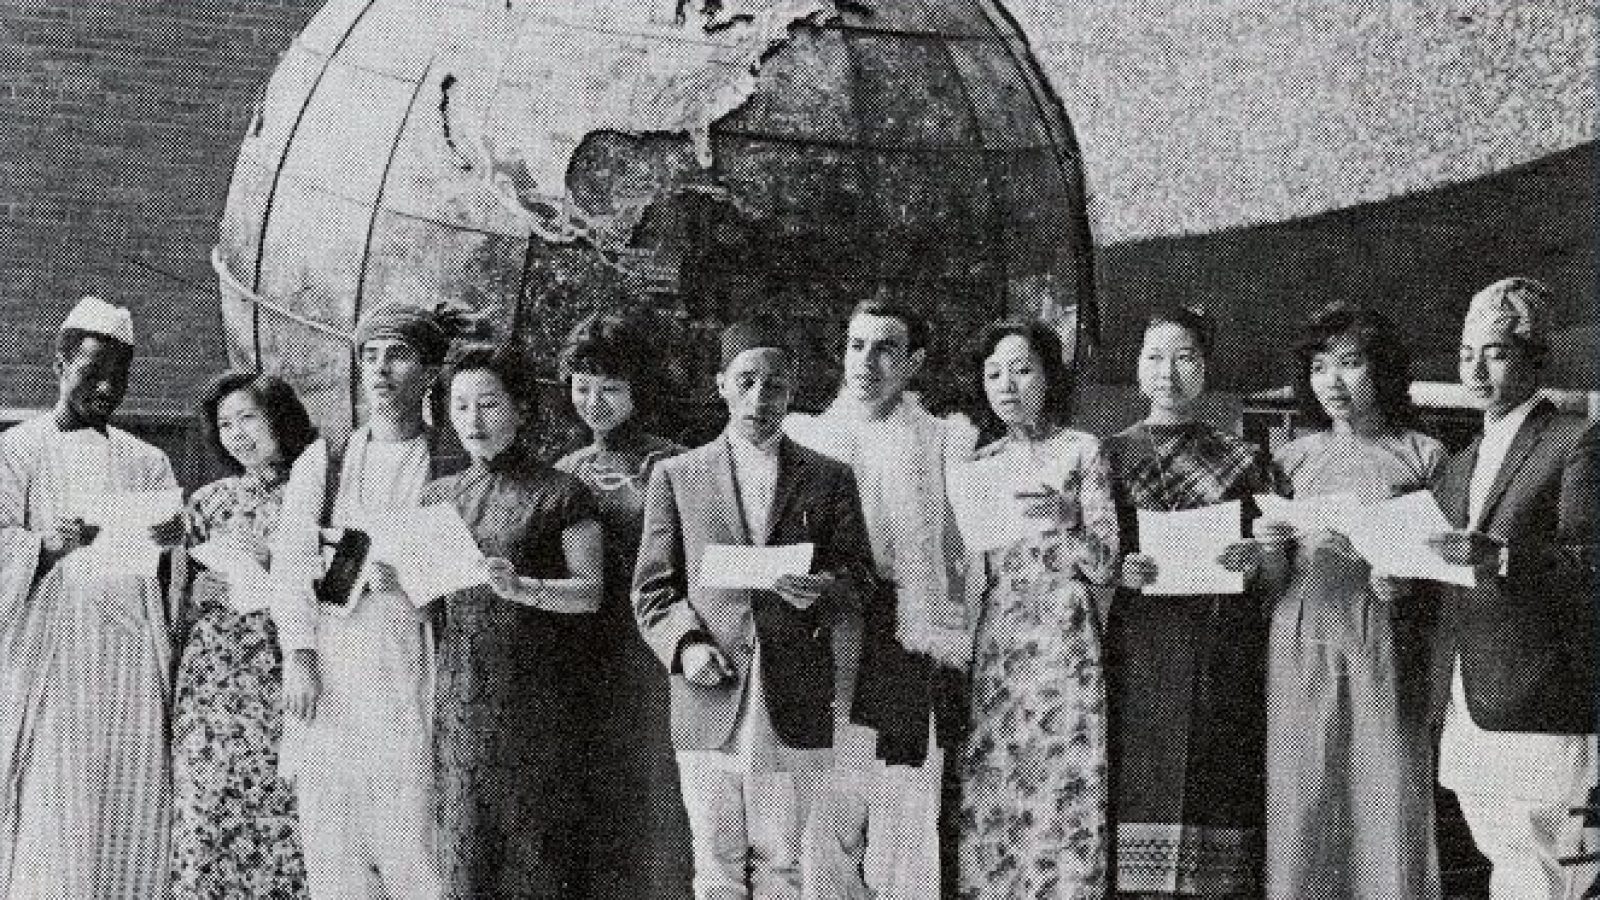 Black and white of a group of international students in their national dress in front of the historic SFS globe.